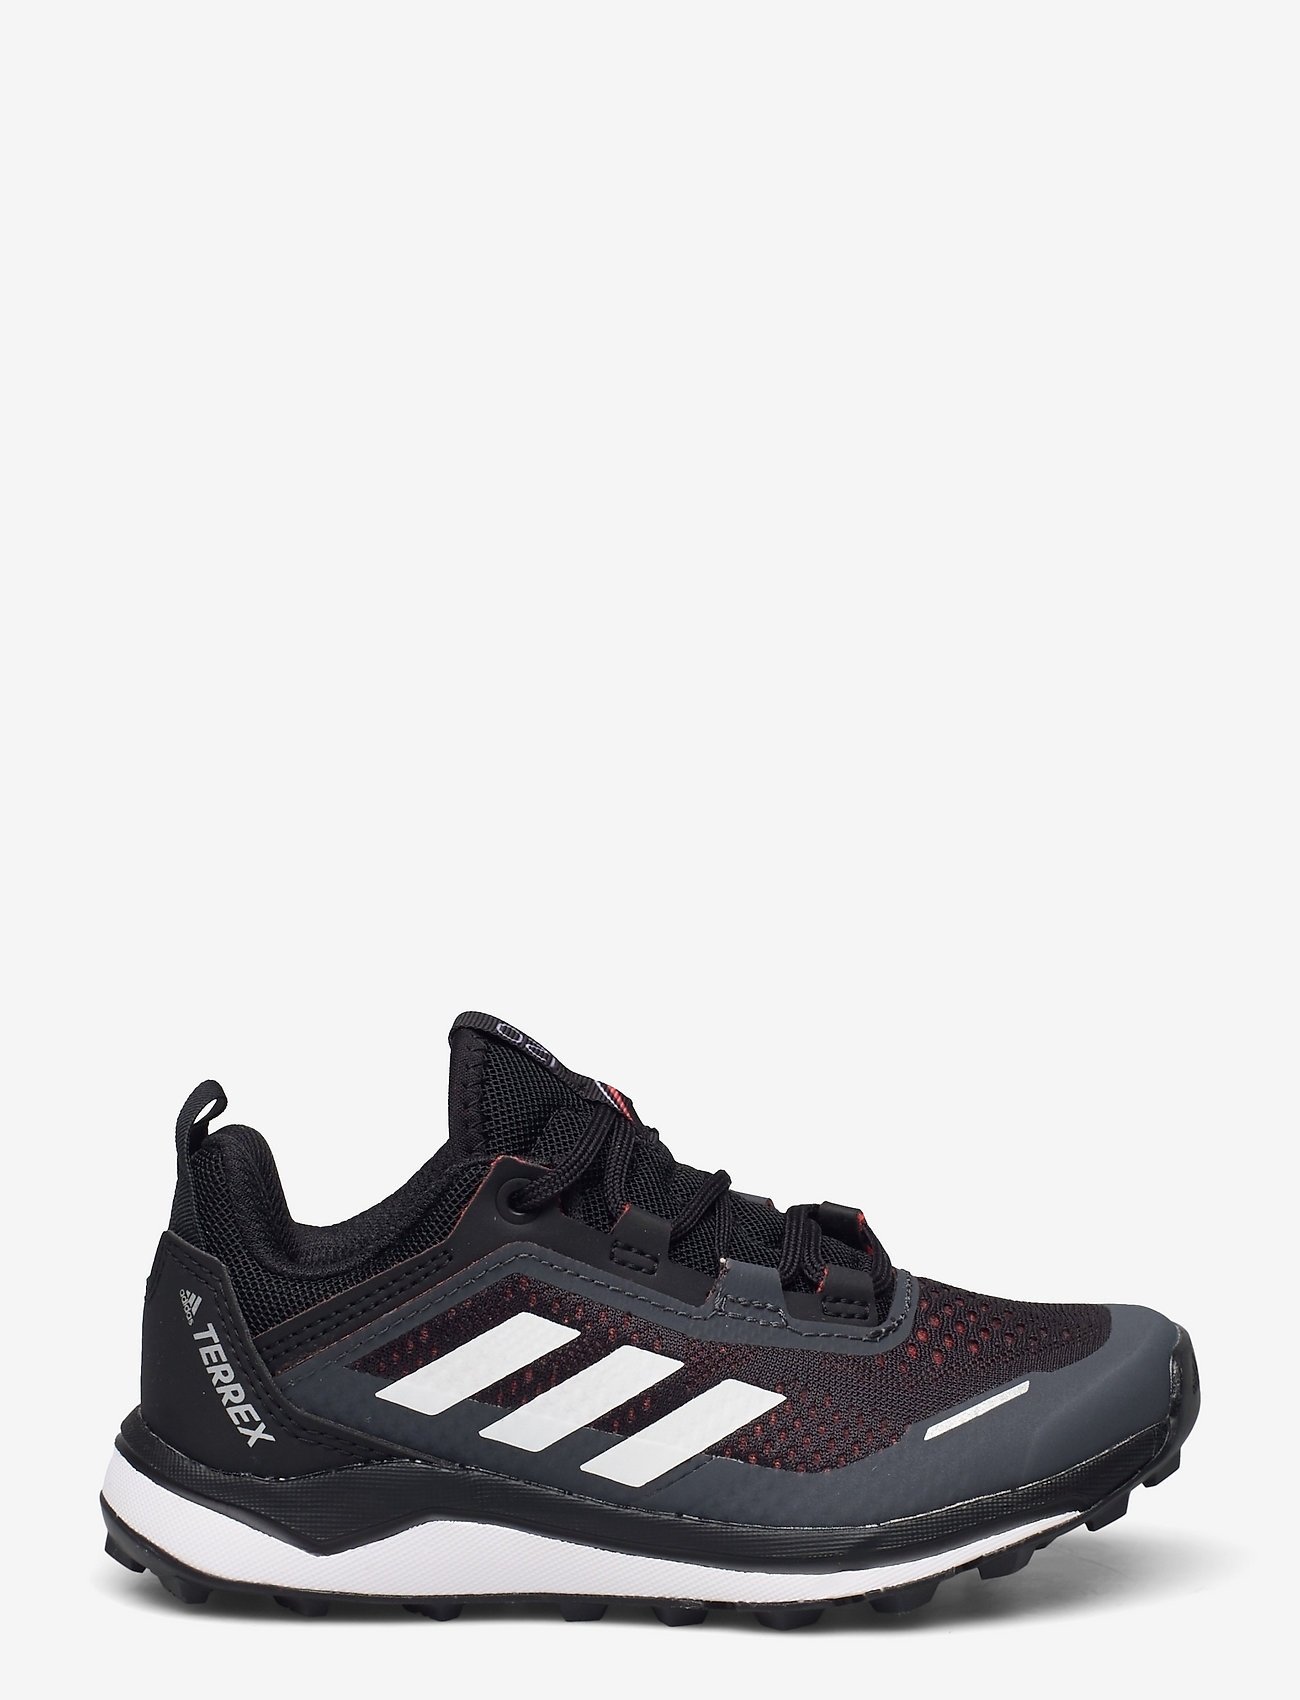 adidas Performance - Terrex Agravic Flow Primegreen Trail Running Shoes - cblack/crywht/solred - 1